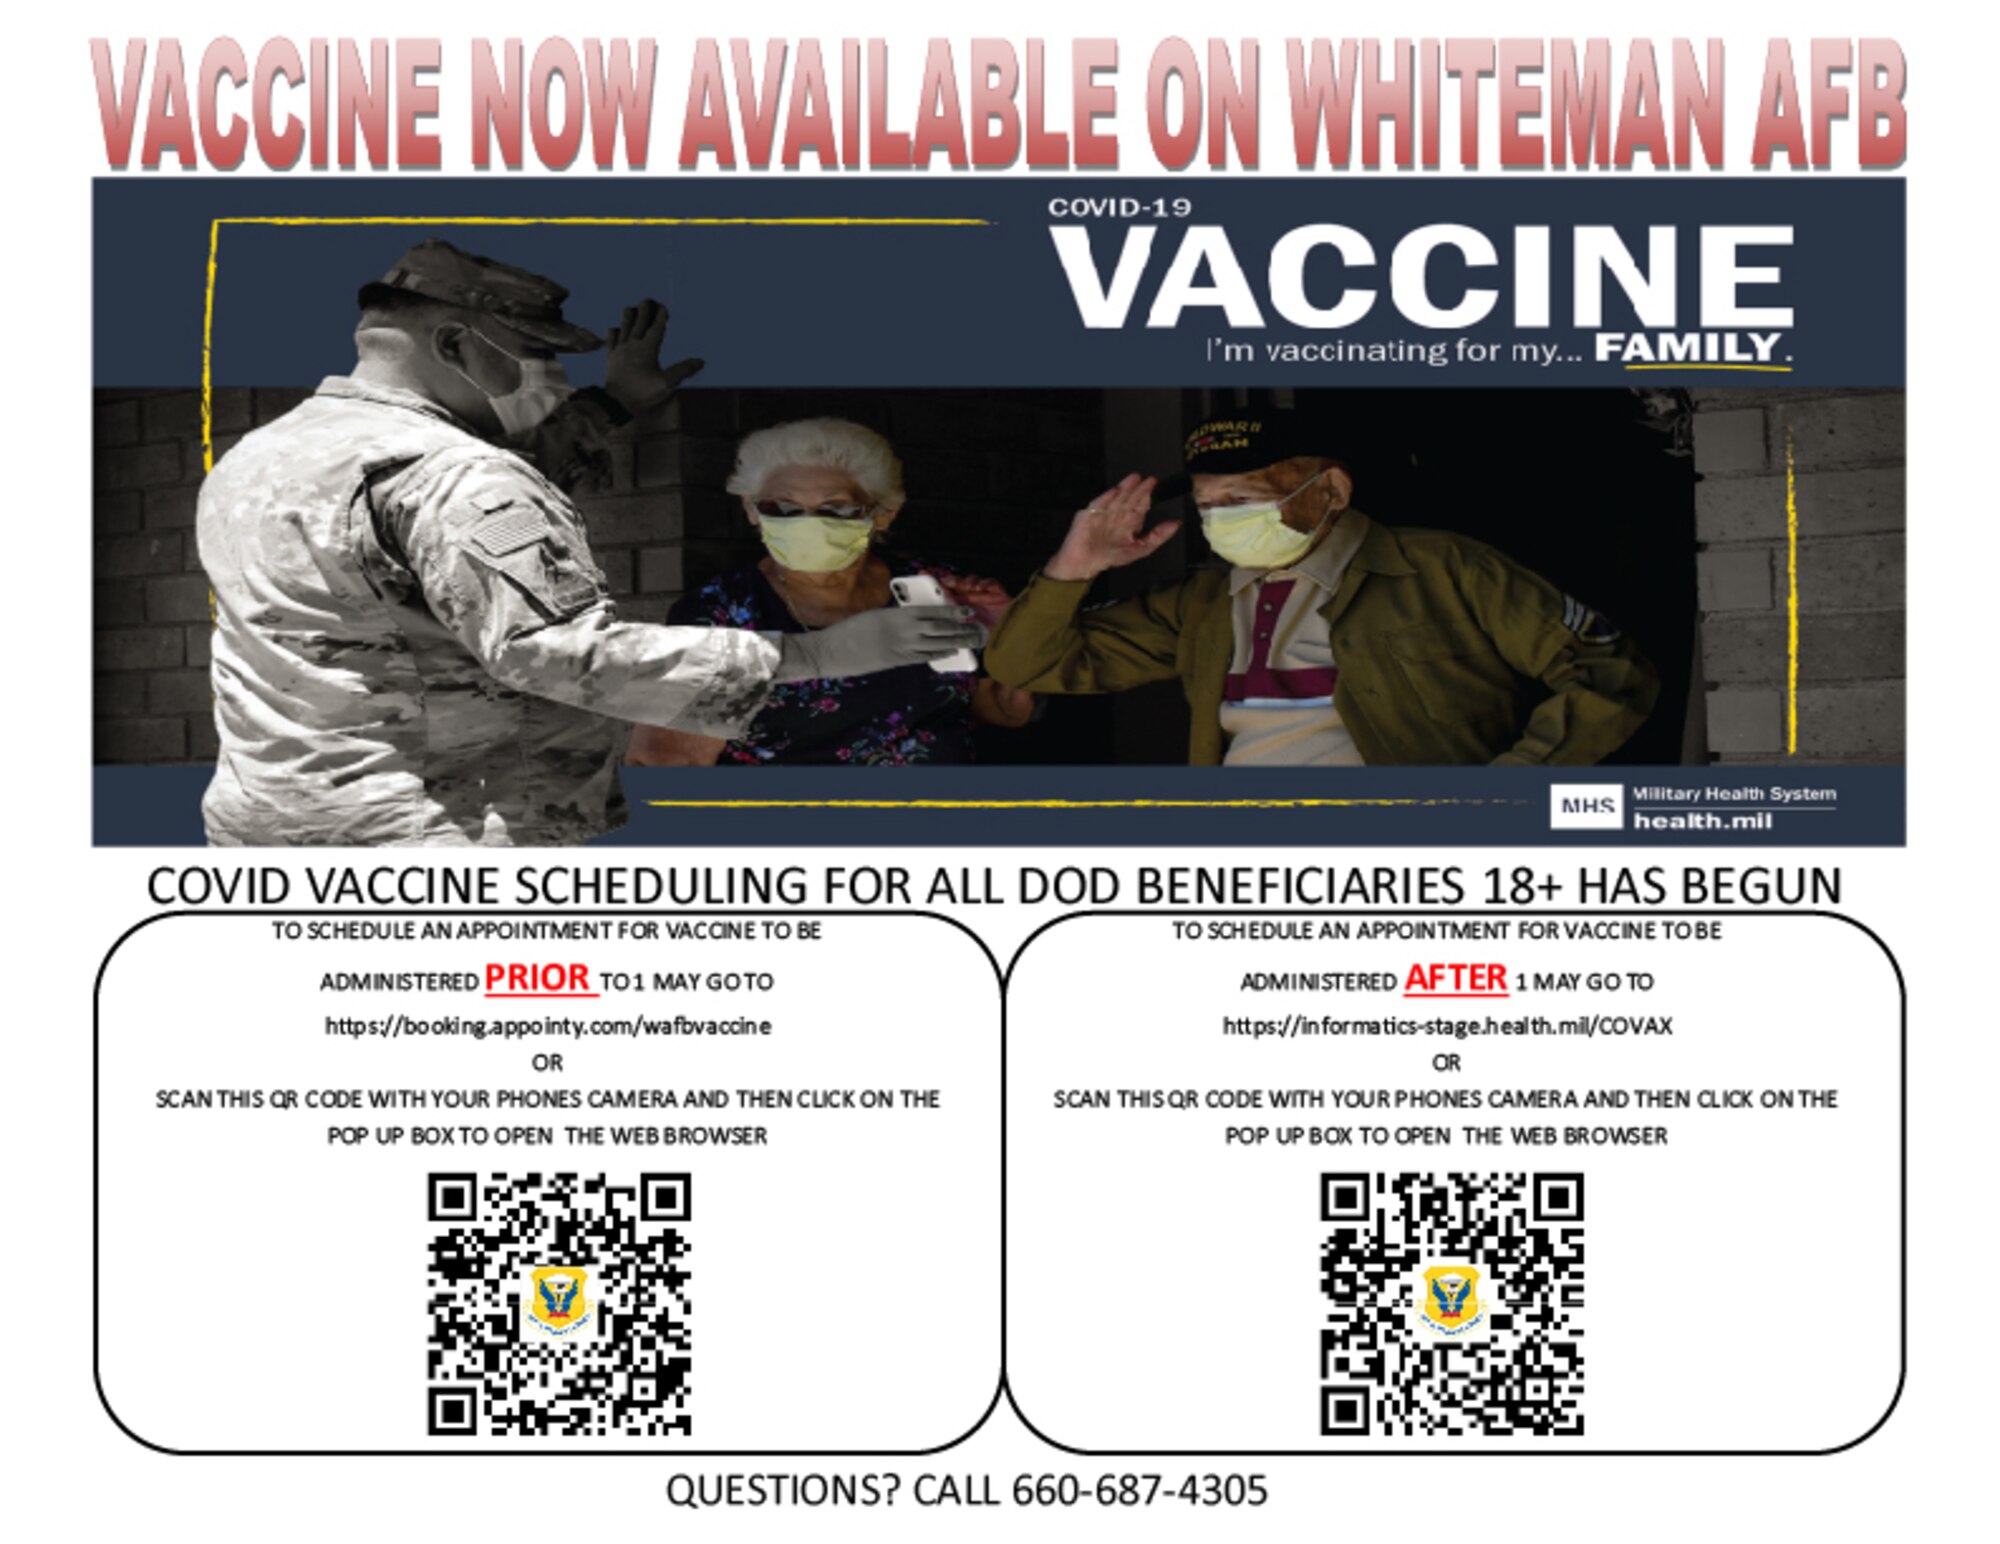 A flyer for COVID-19 Vaccines